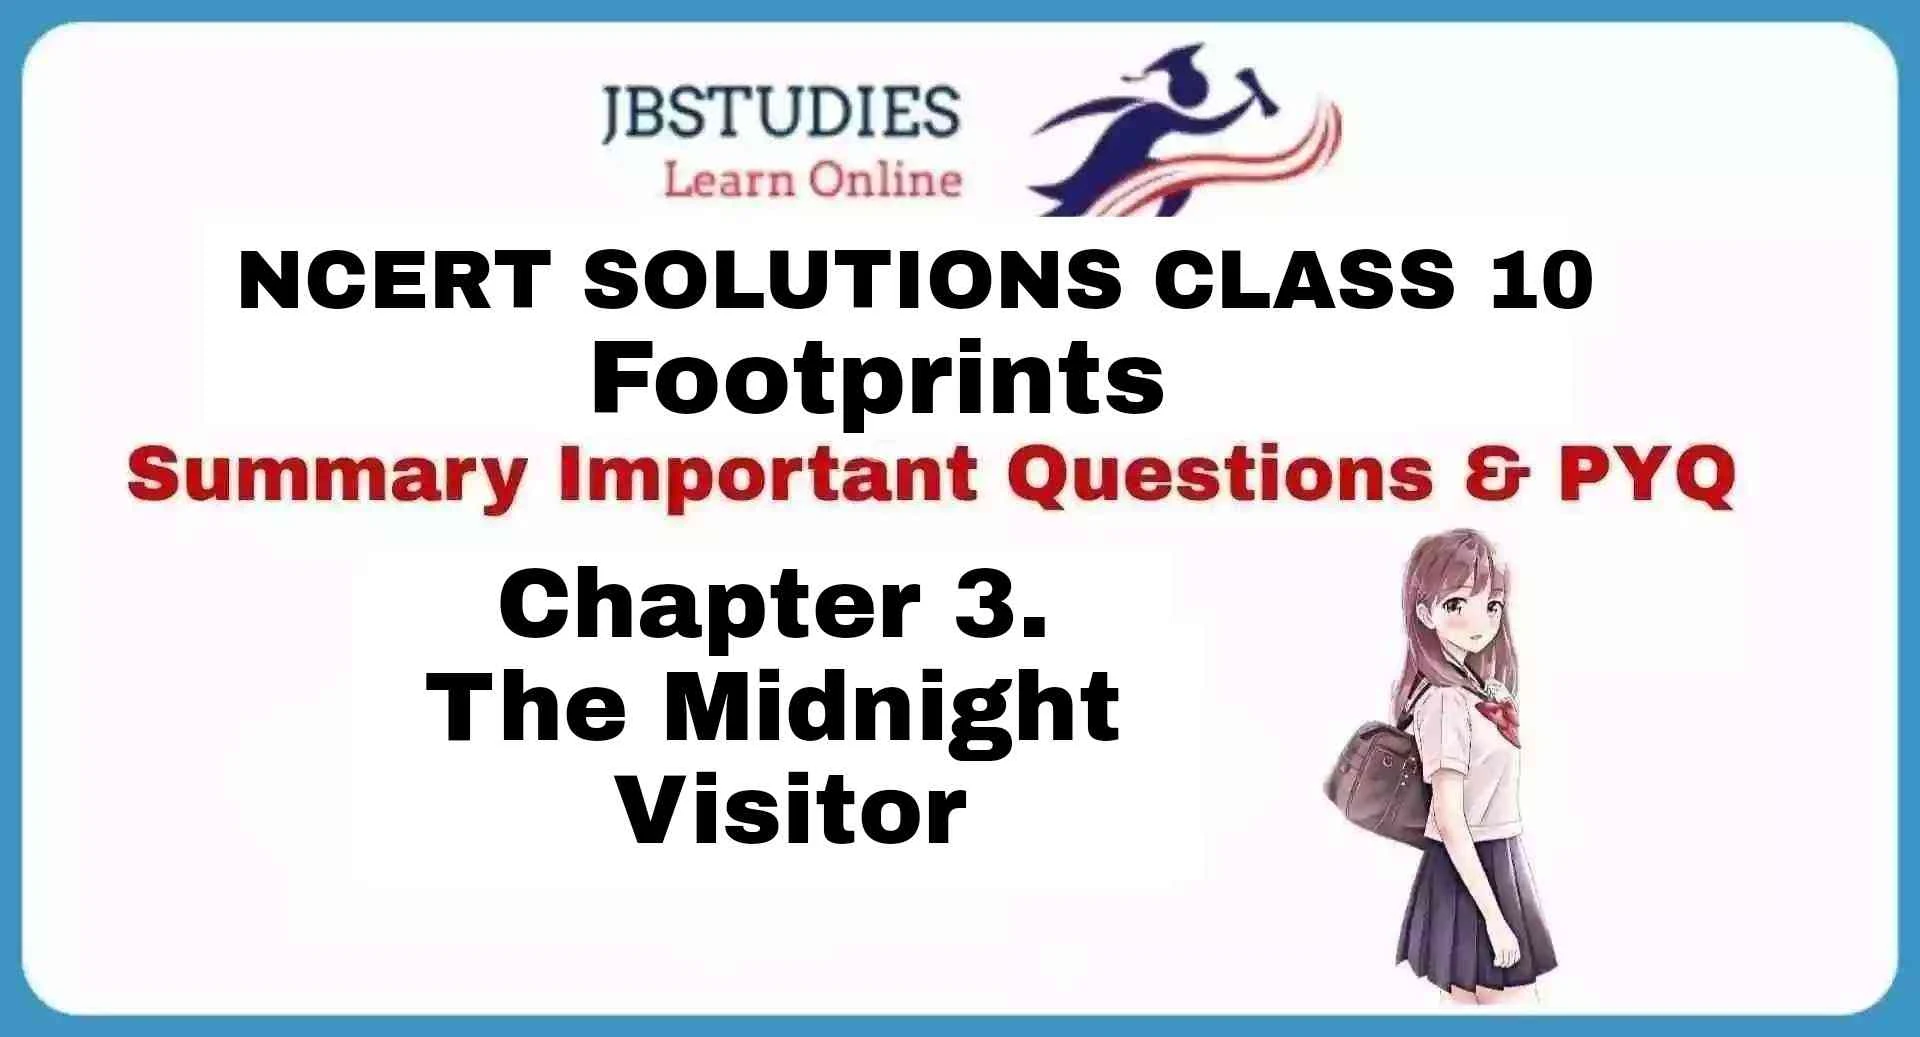 Solutions Class 10 Footprints Chapter-3 The Midnight Visitor